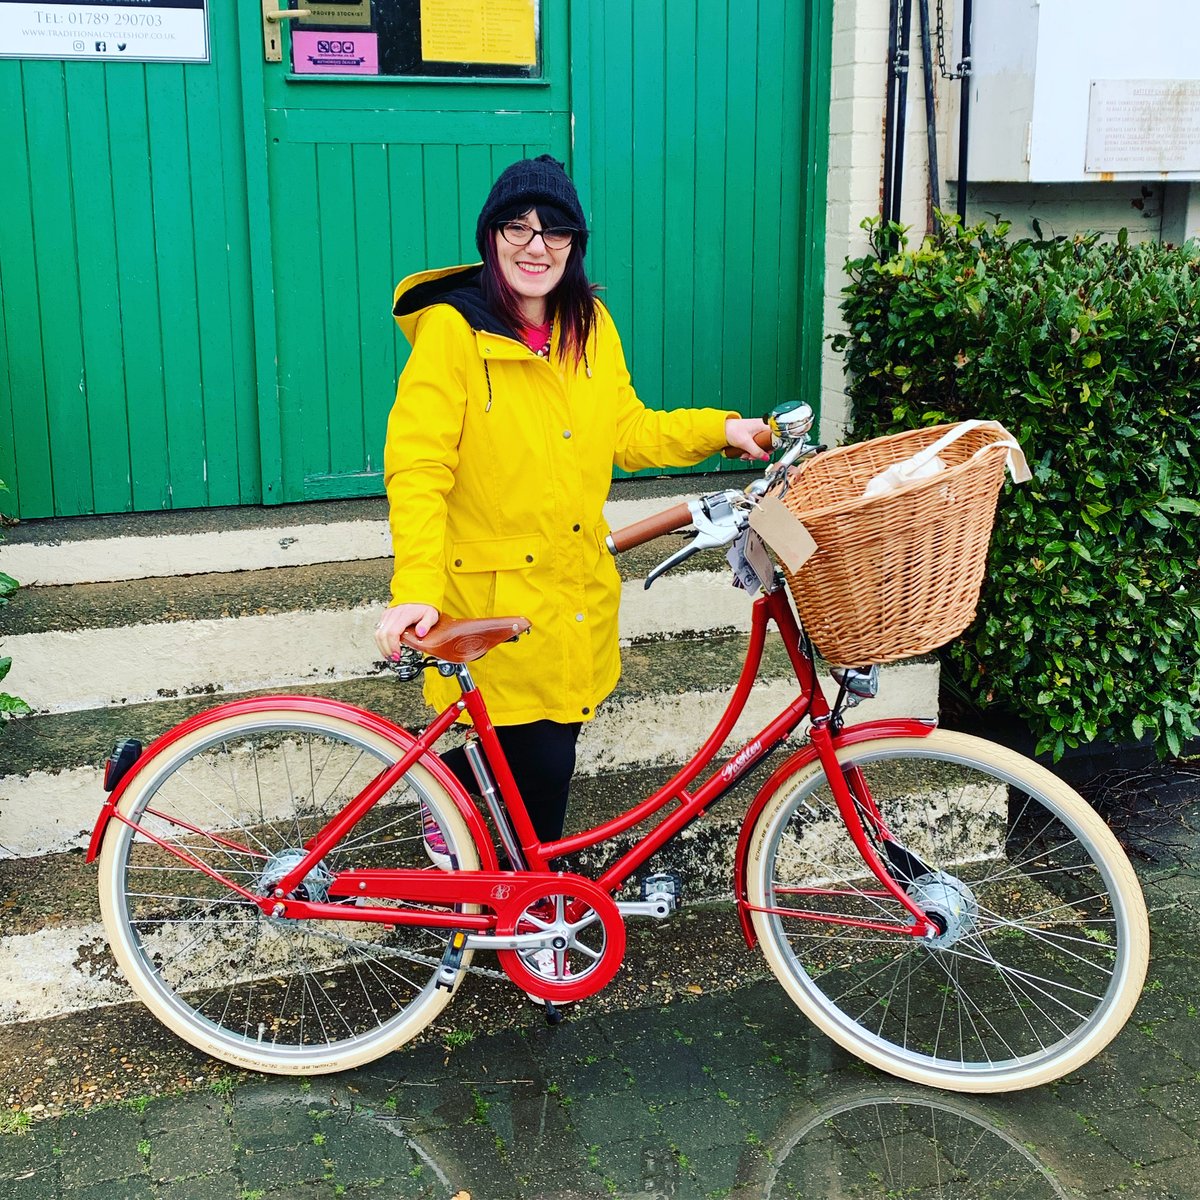 Appropriately-dressed Michelle collecting her new Pashley Britannia.
#newbike #pashleybritannia